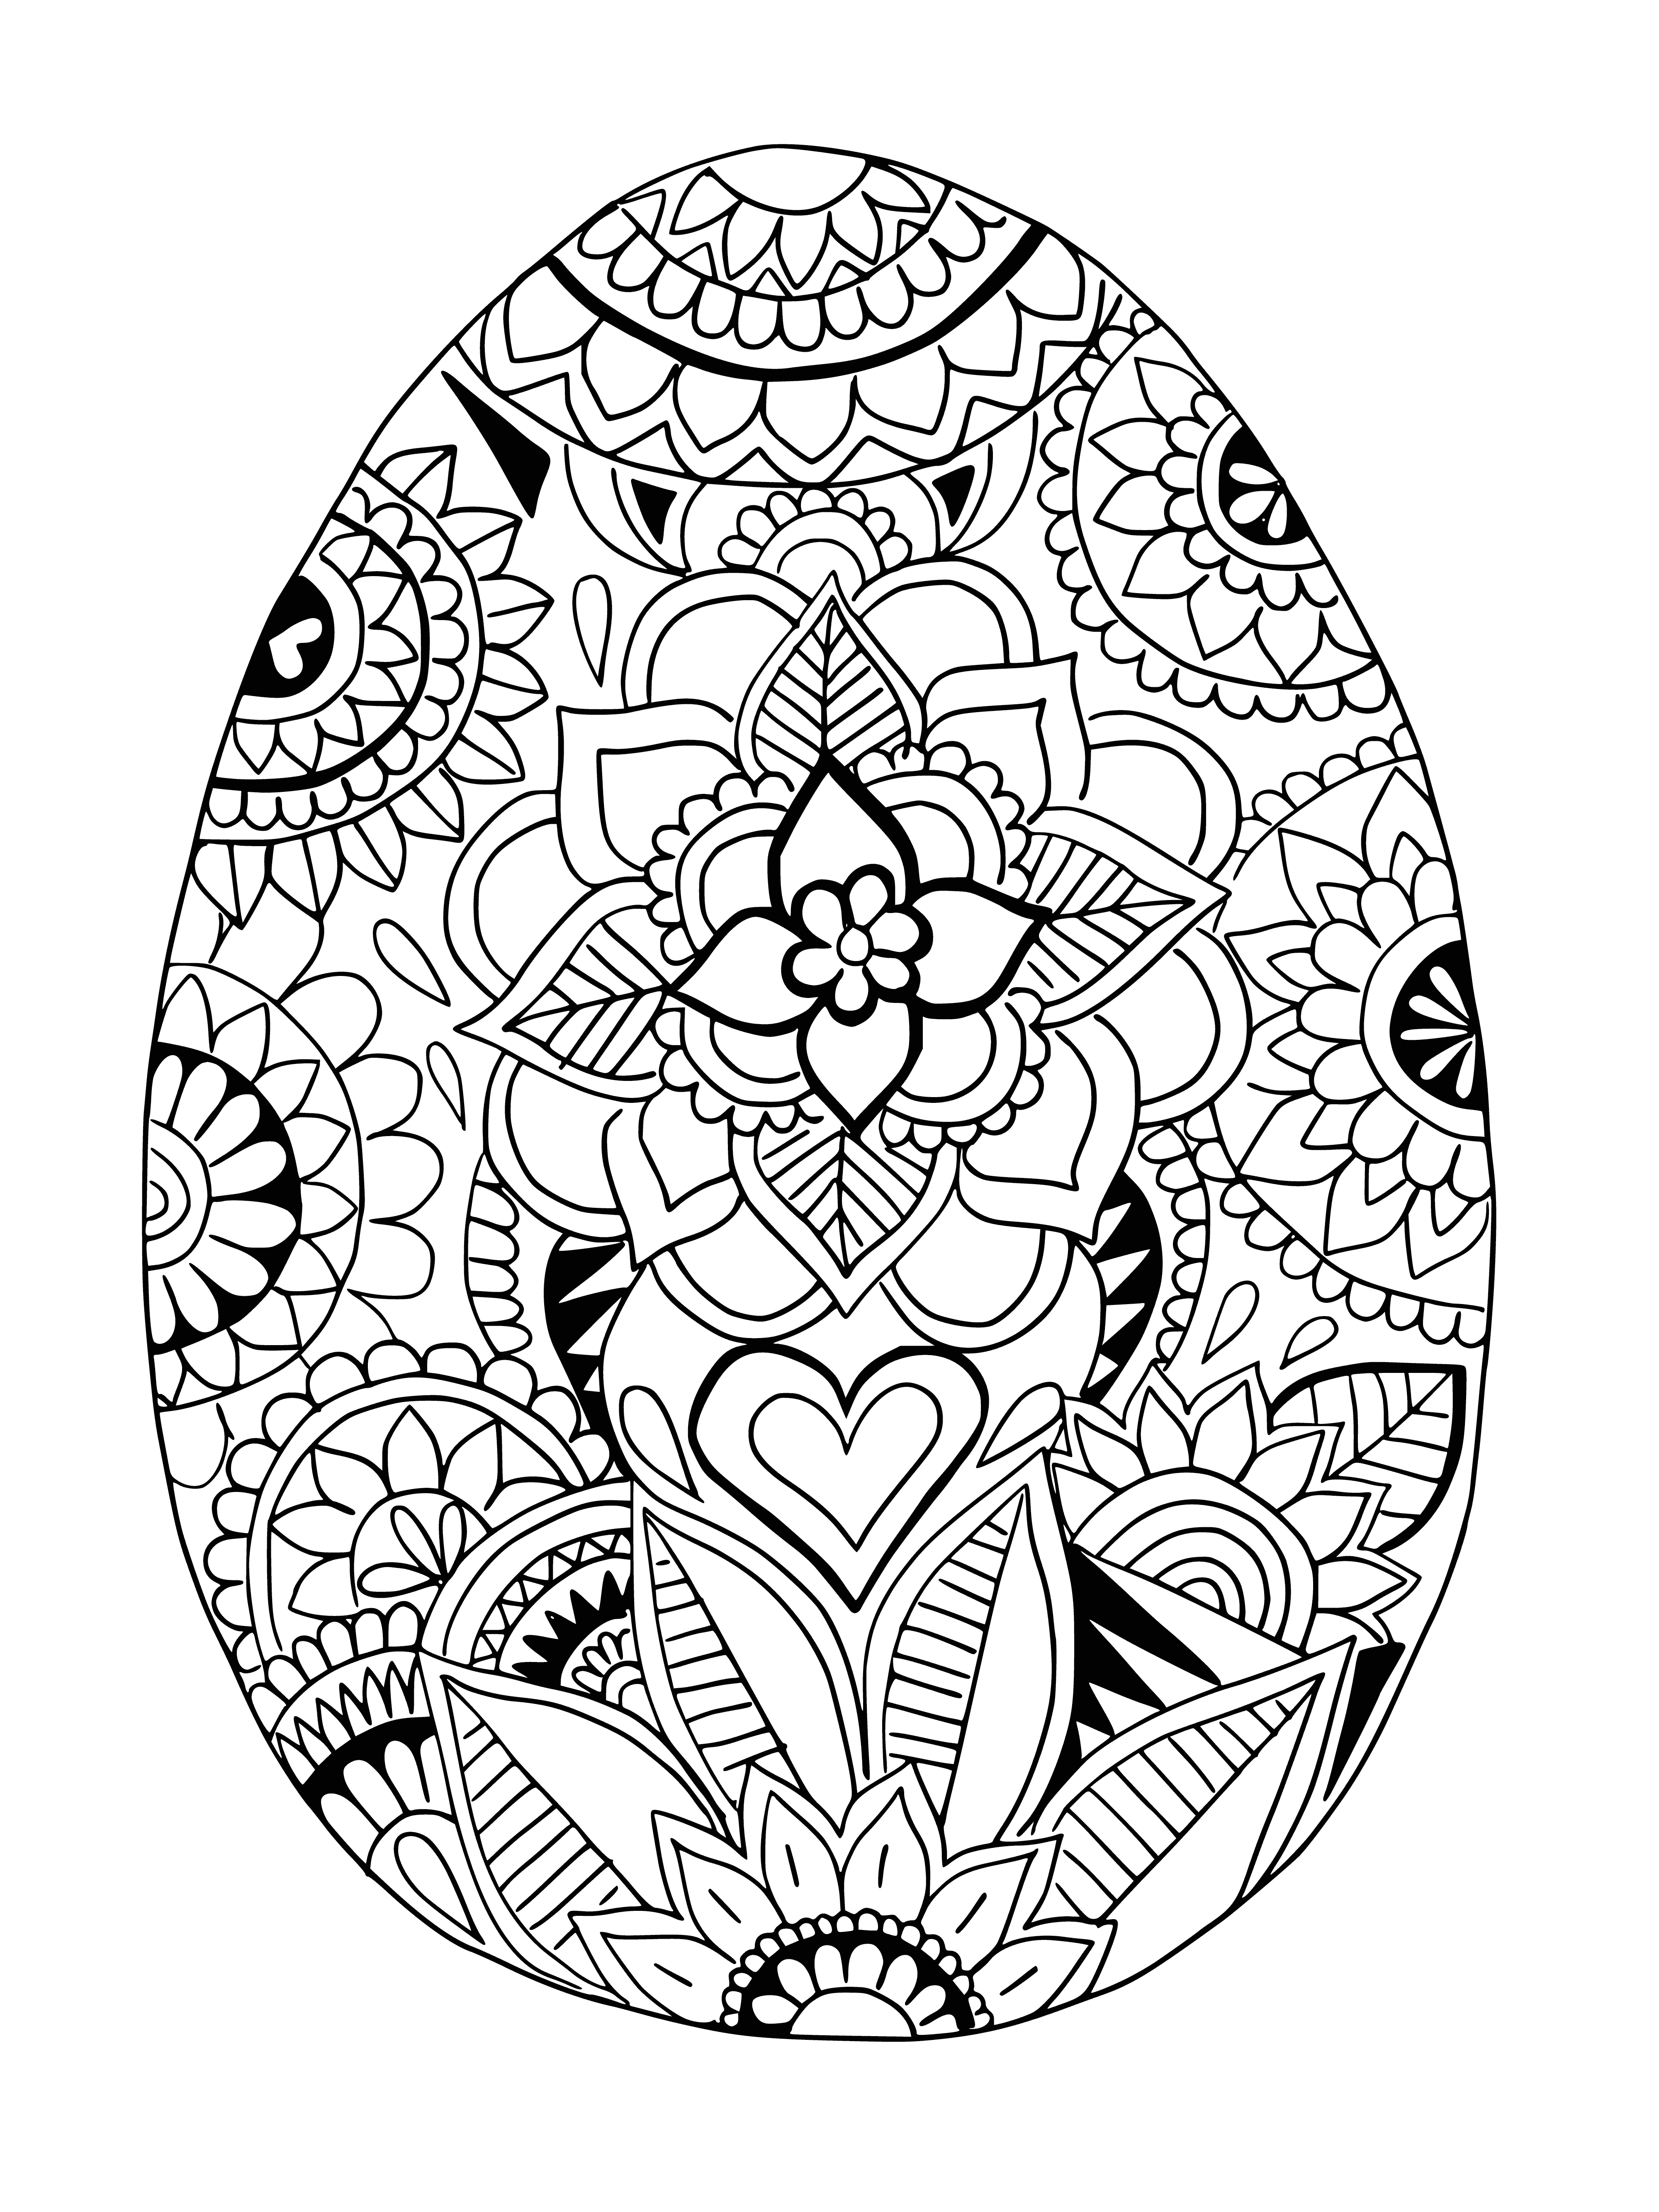 coloring page: Color Easter eggs with fun patterns, bunny ears & chicks! A fun way to celebrate the season.